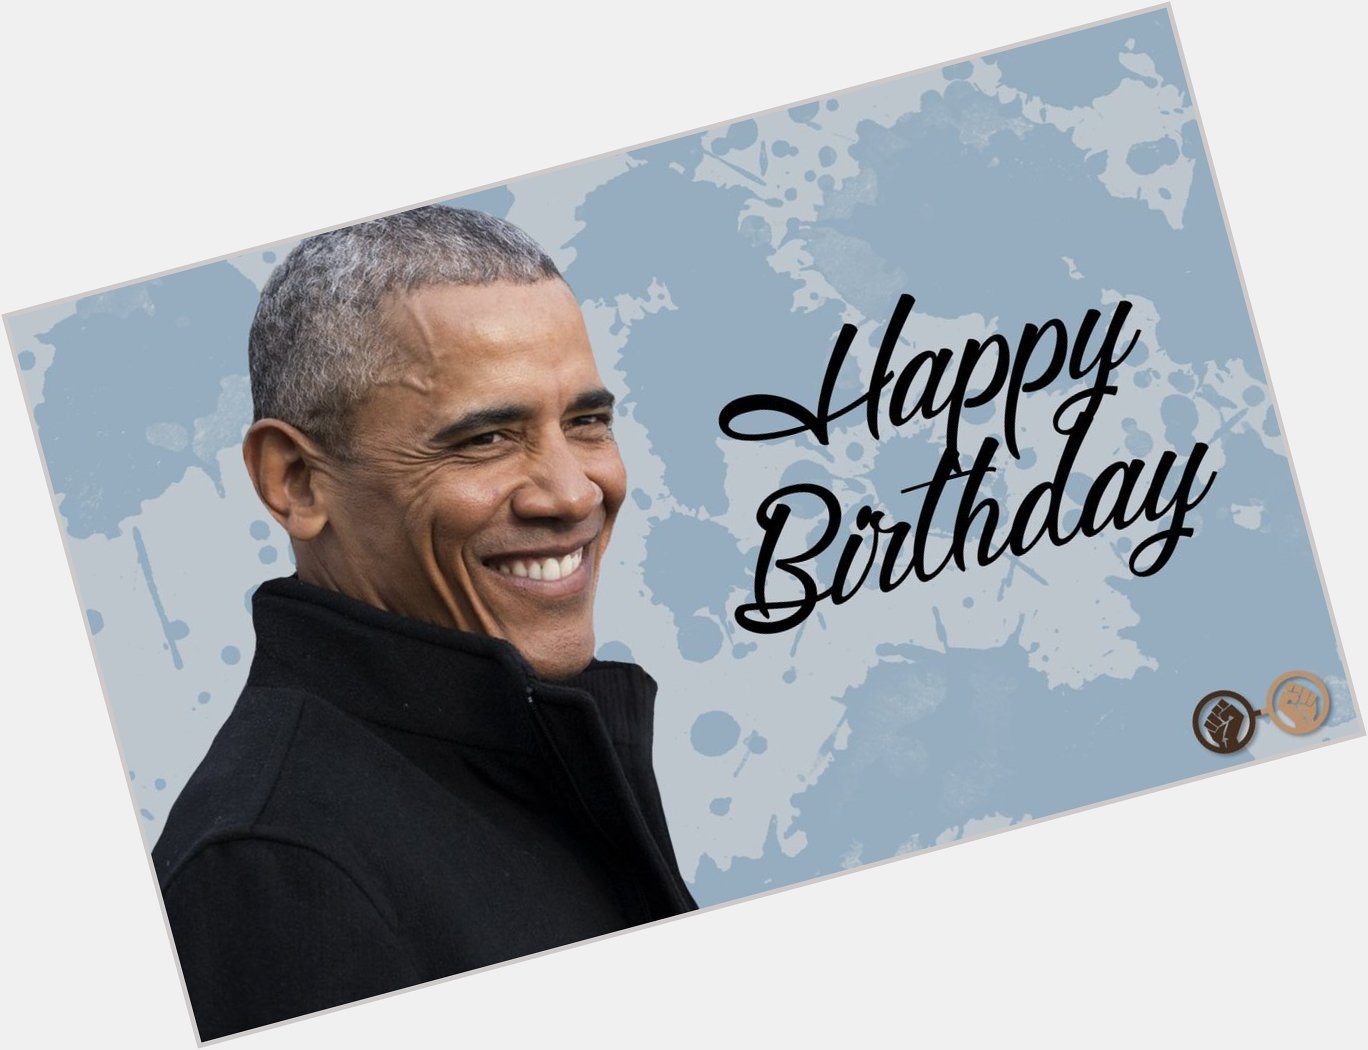 Happy birthday, Barack Obama! The amazing former president turns 57 today. We wish him all the best! 